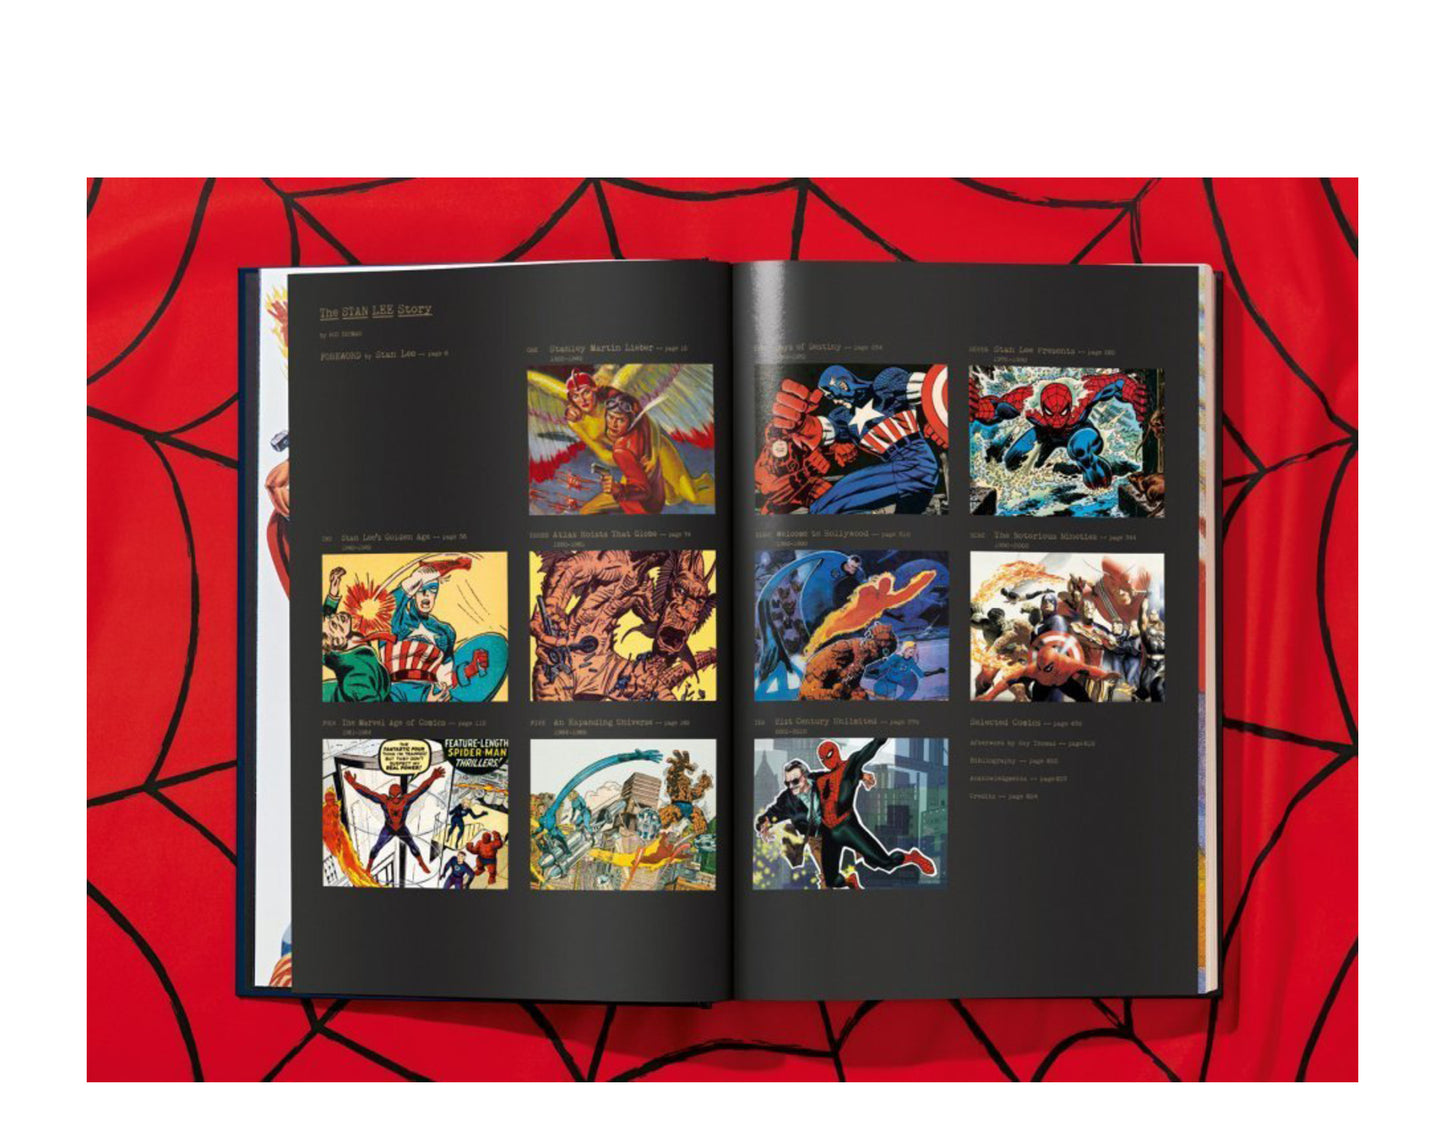 Taschen Books - The Stan Lee Story Hardcover Book